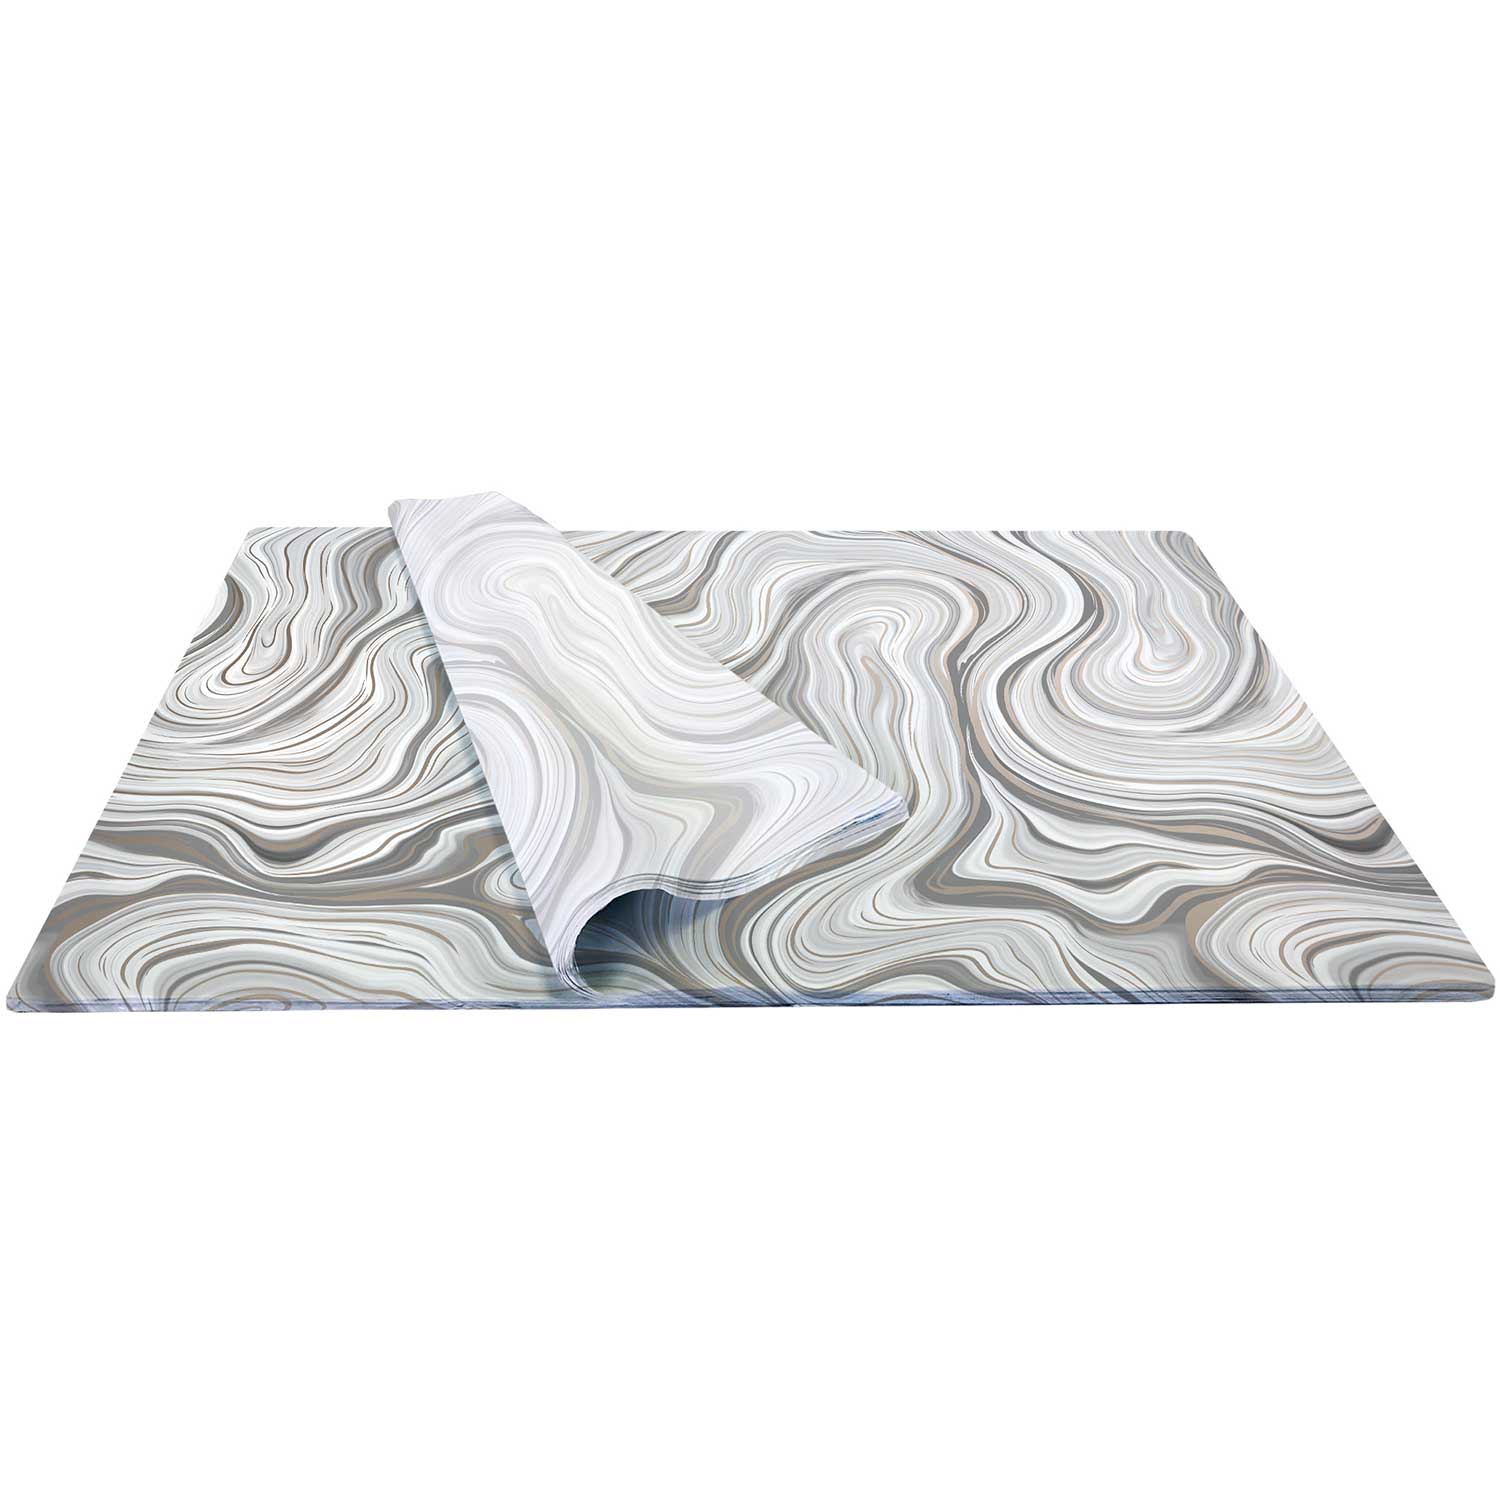 Marbleized Silver 20 x 30 Gift Tissue Paper, 24 Folded Sheets